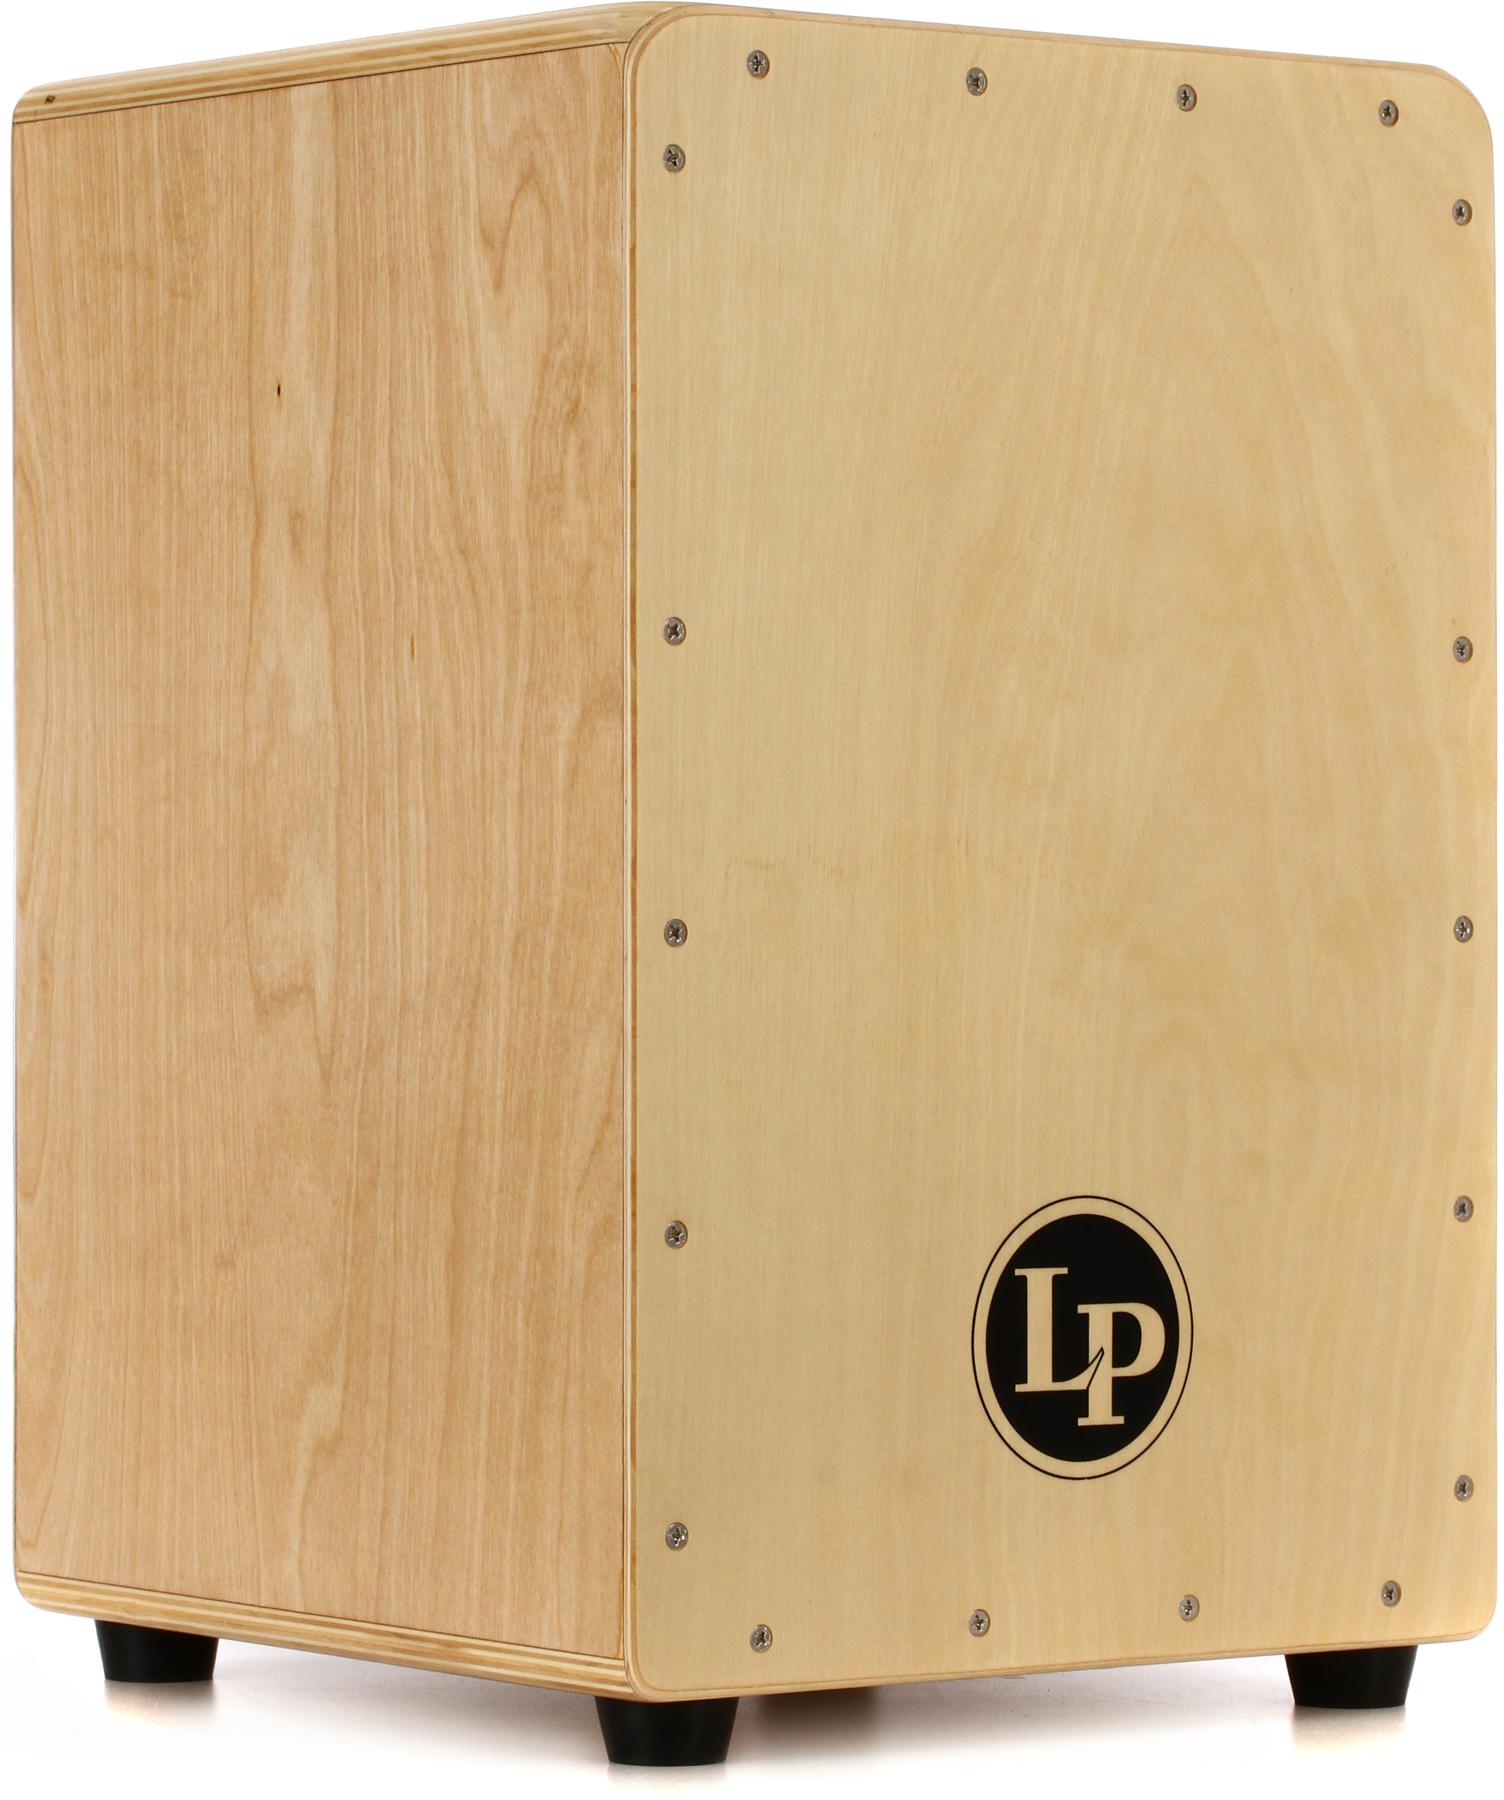 Latin Percussion Aspire Series Wood Block with Striker - Small